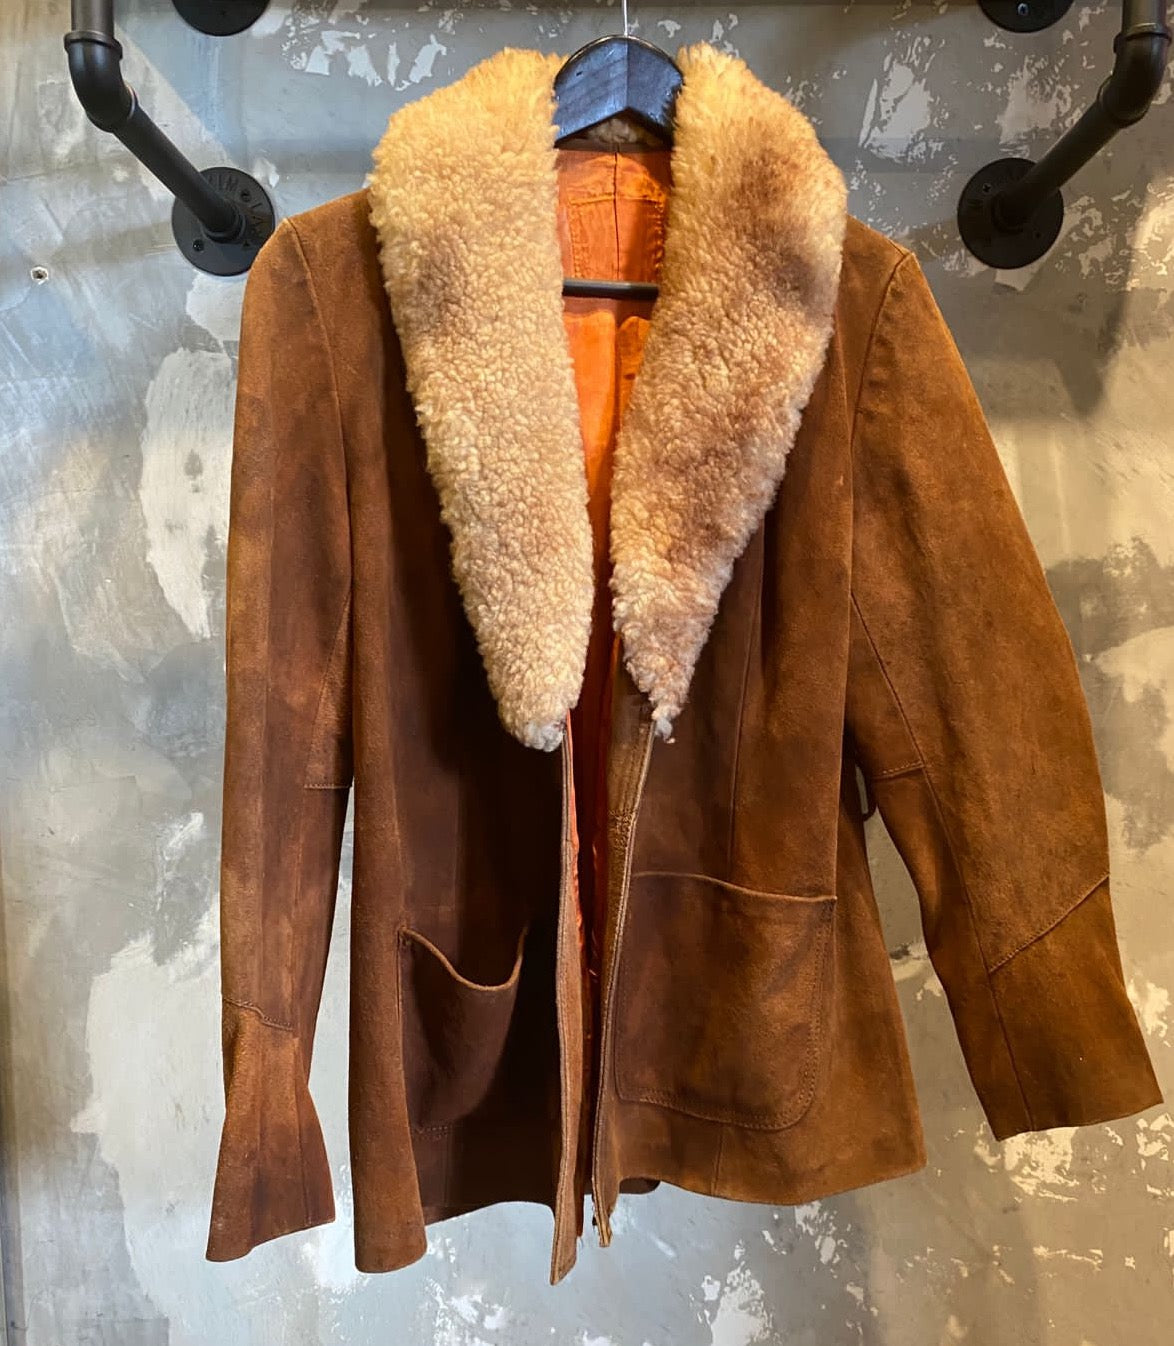 70s Suade Jacket with Sheep Fur